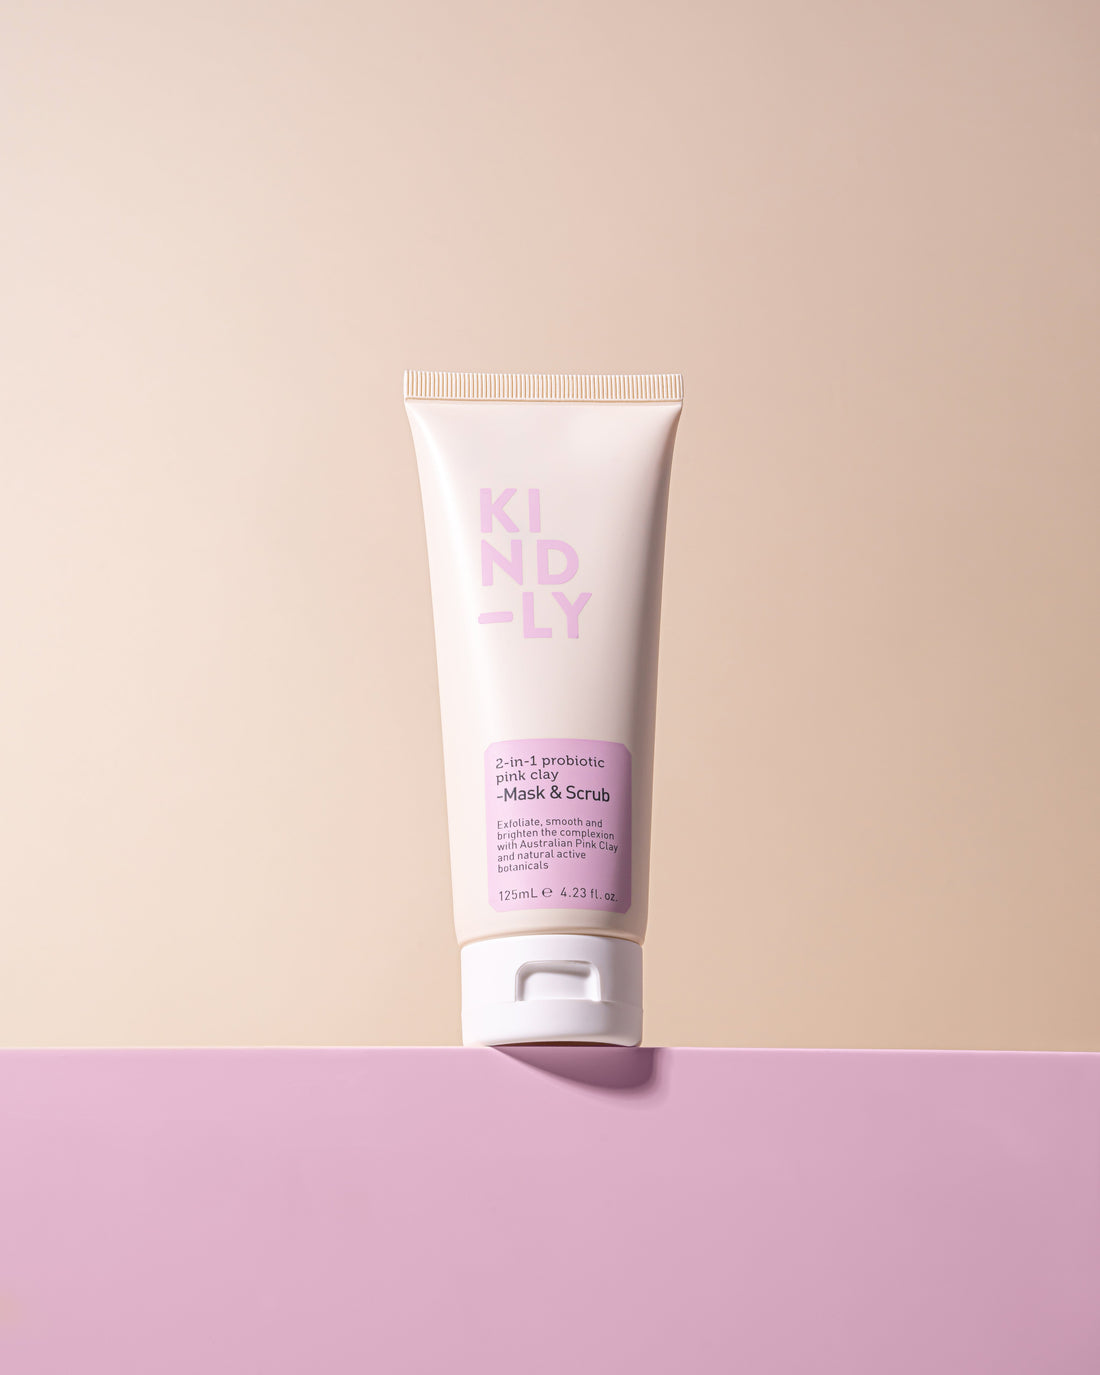 Free 2-in-1 Probiotic Pink Clay Mask & Scrub